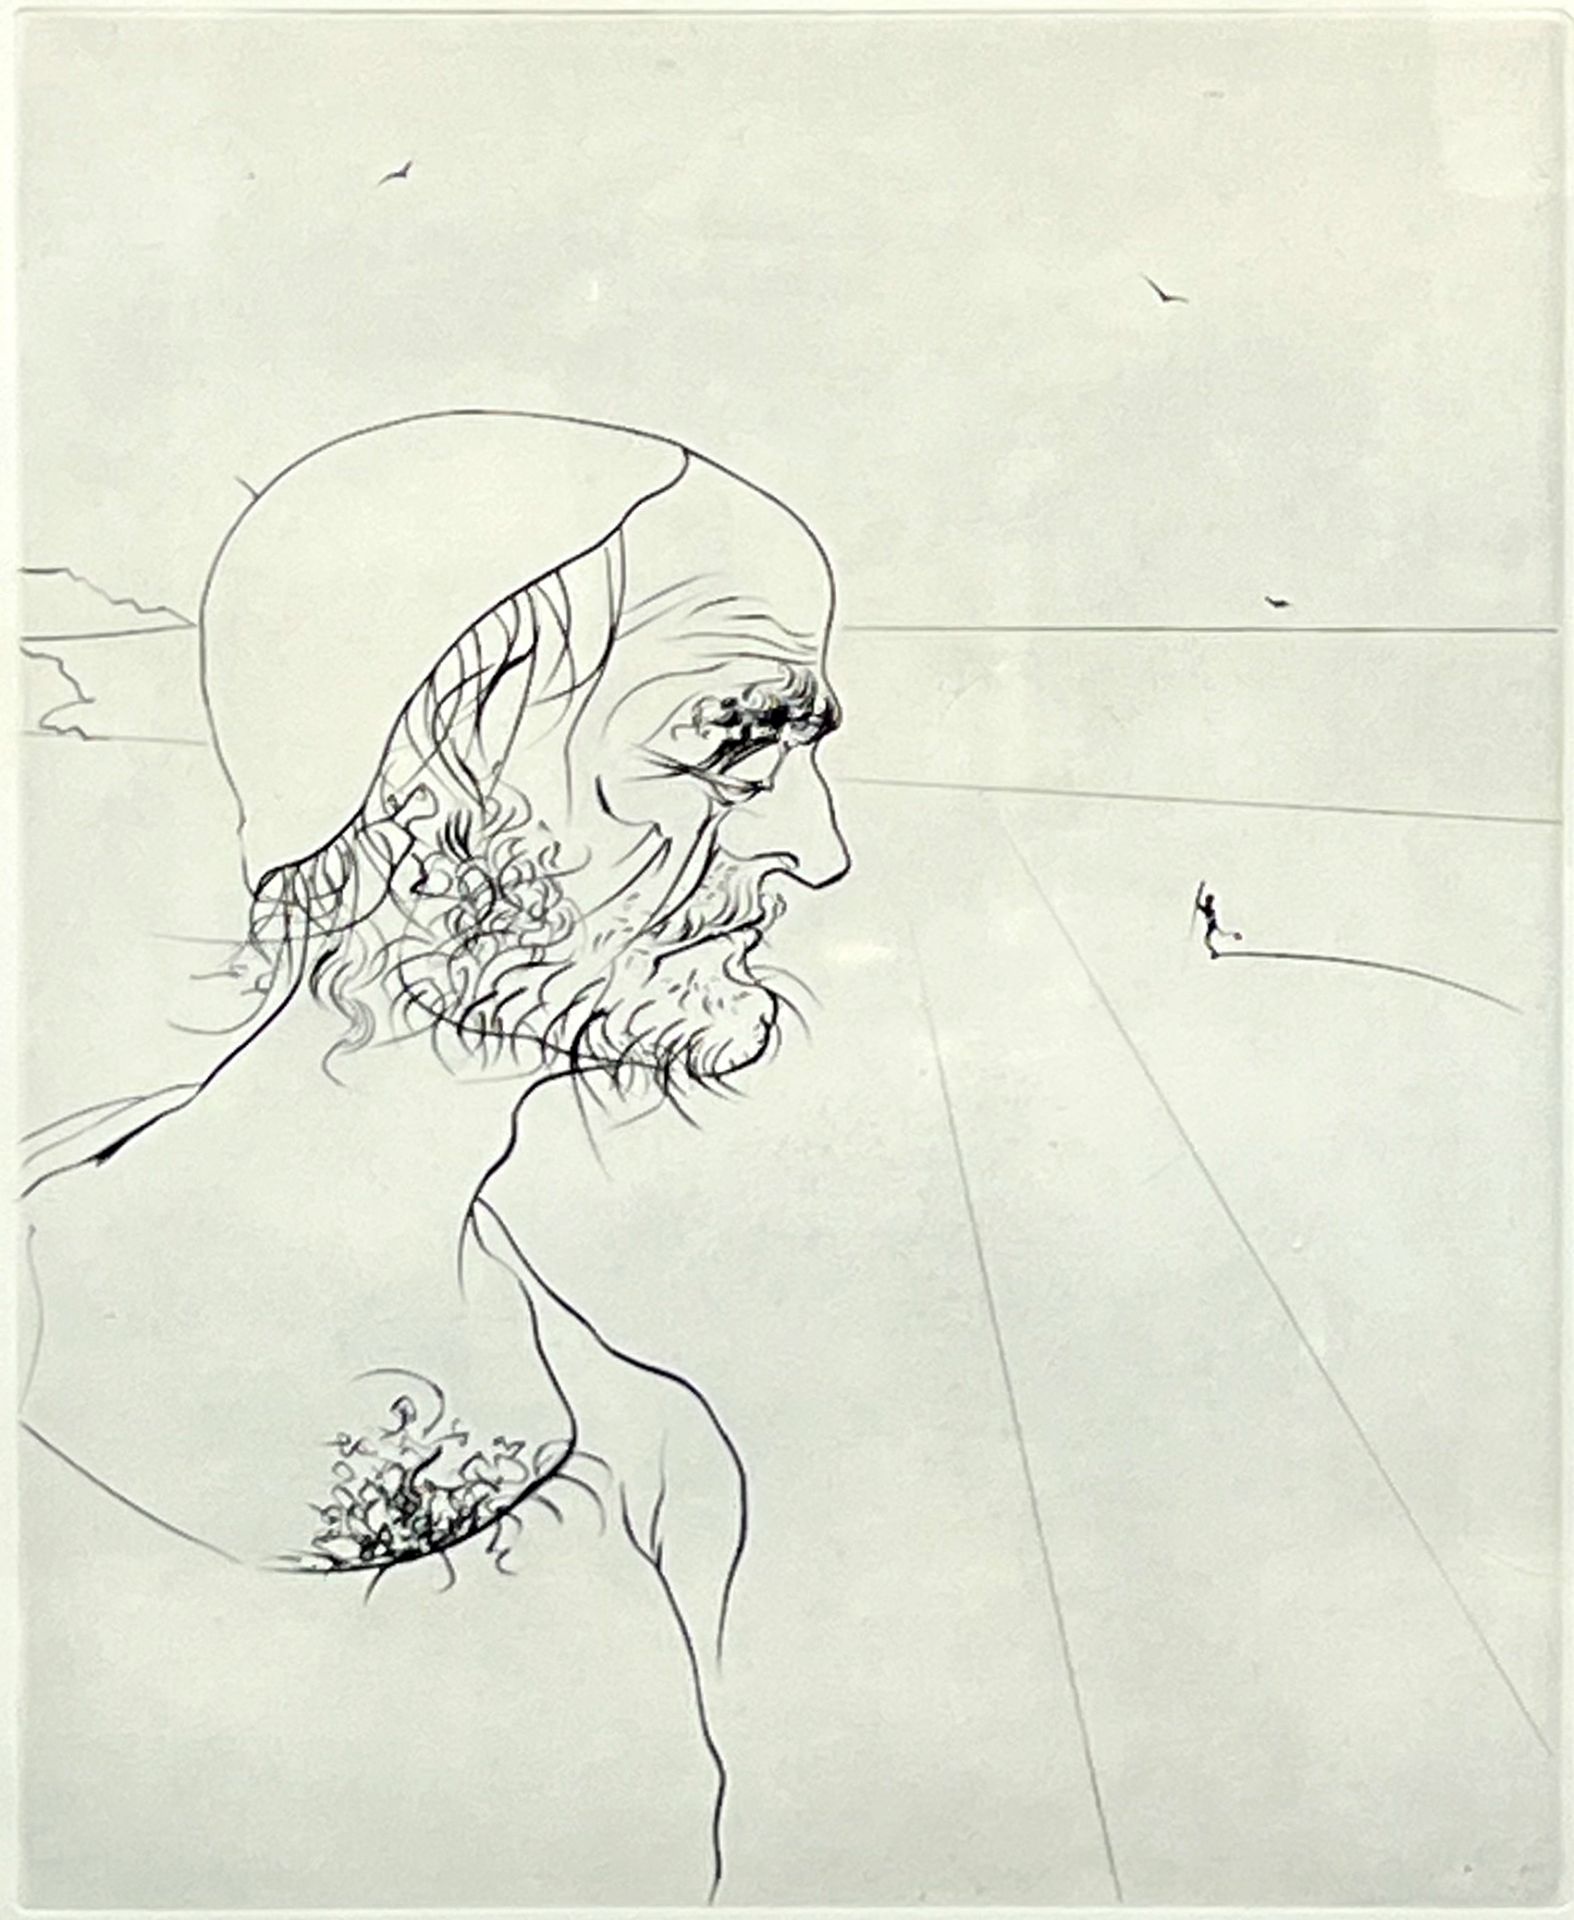 Salvador DALI (1904 - 1989). From the series "Hemingway, E. The old man and the sea". - Image 2 of 10